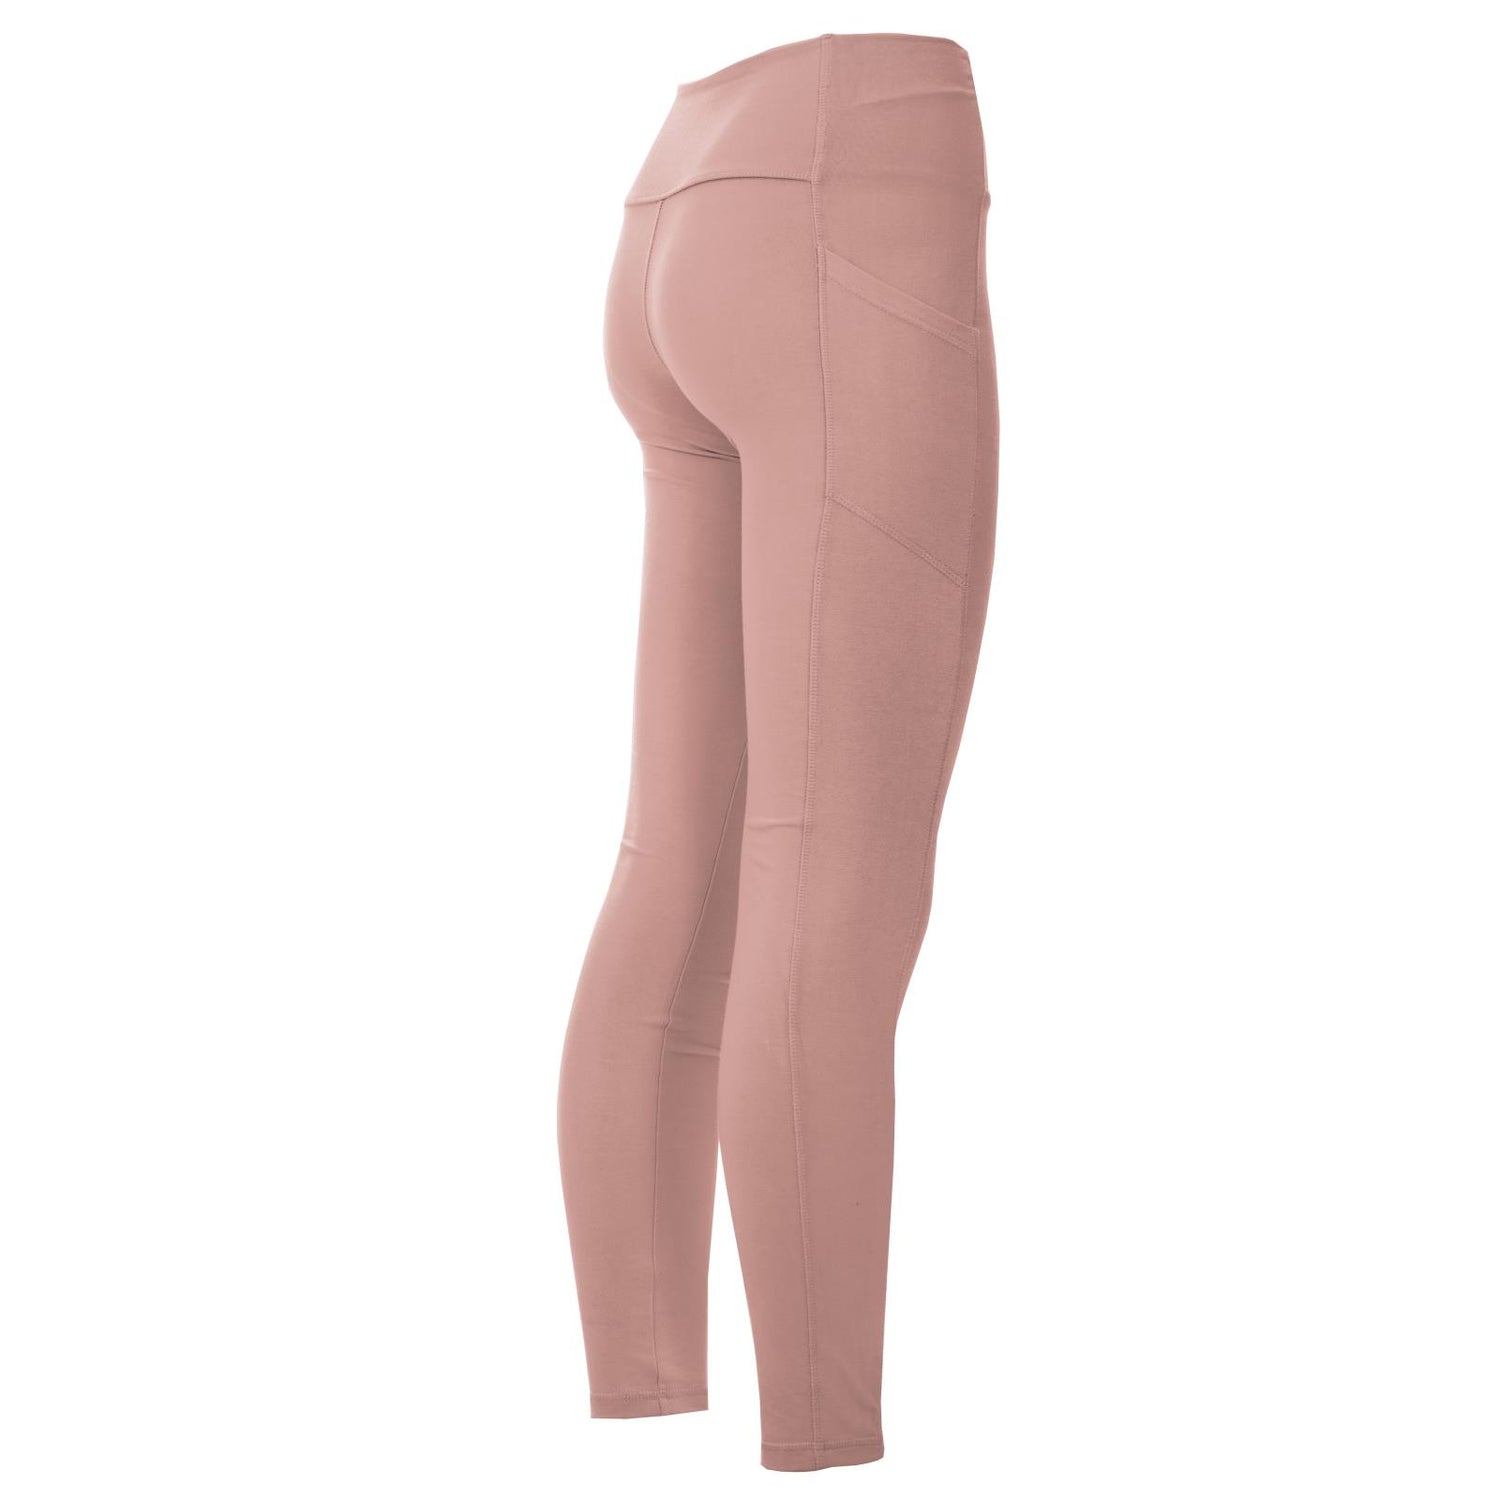 Women's Luxe Stretch Leggings with Pockets in Blush